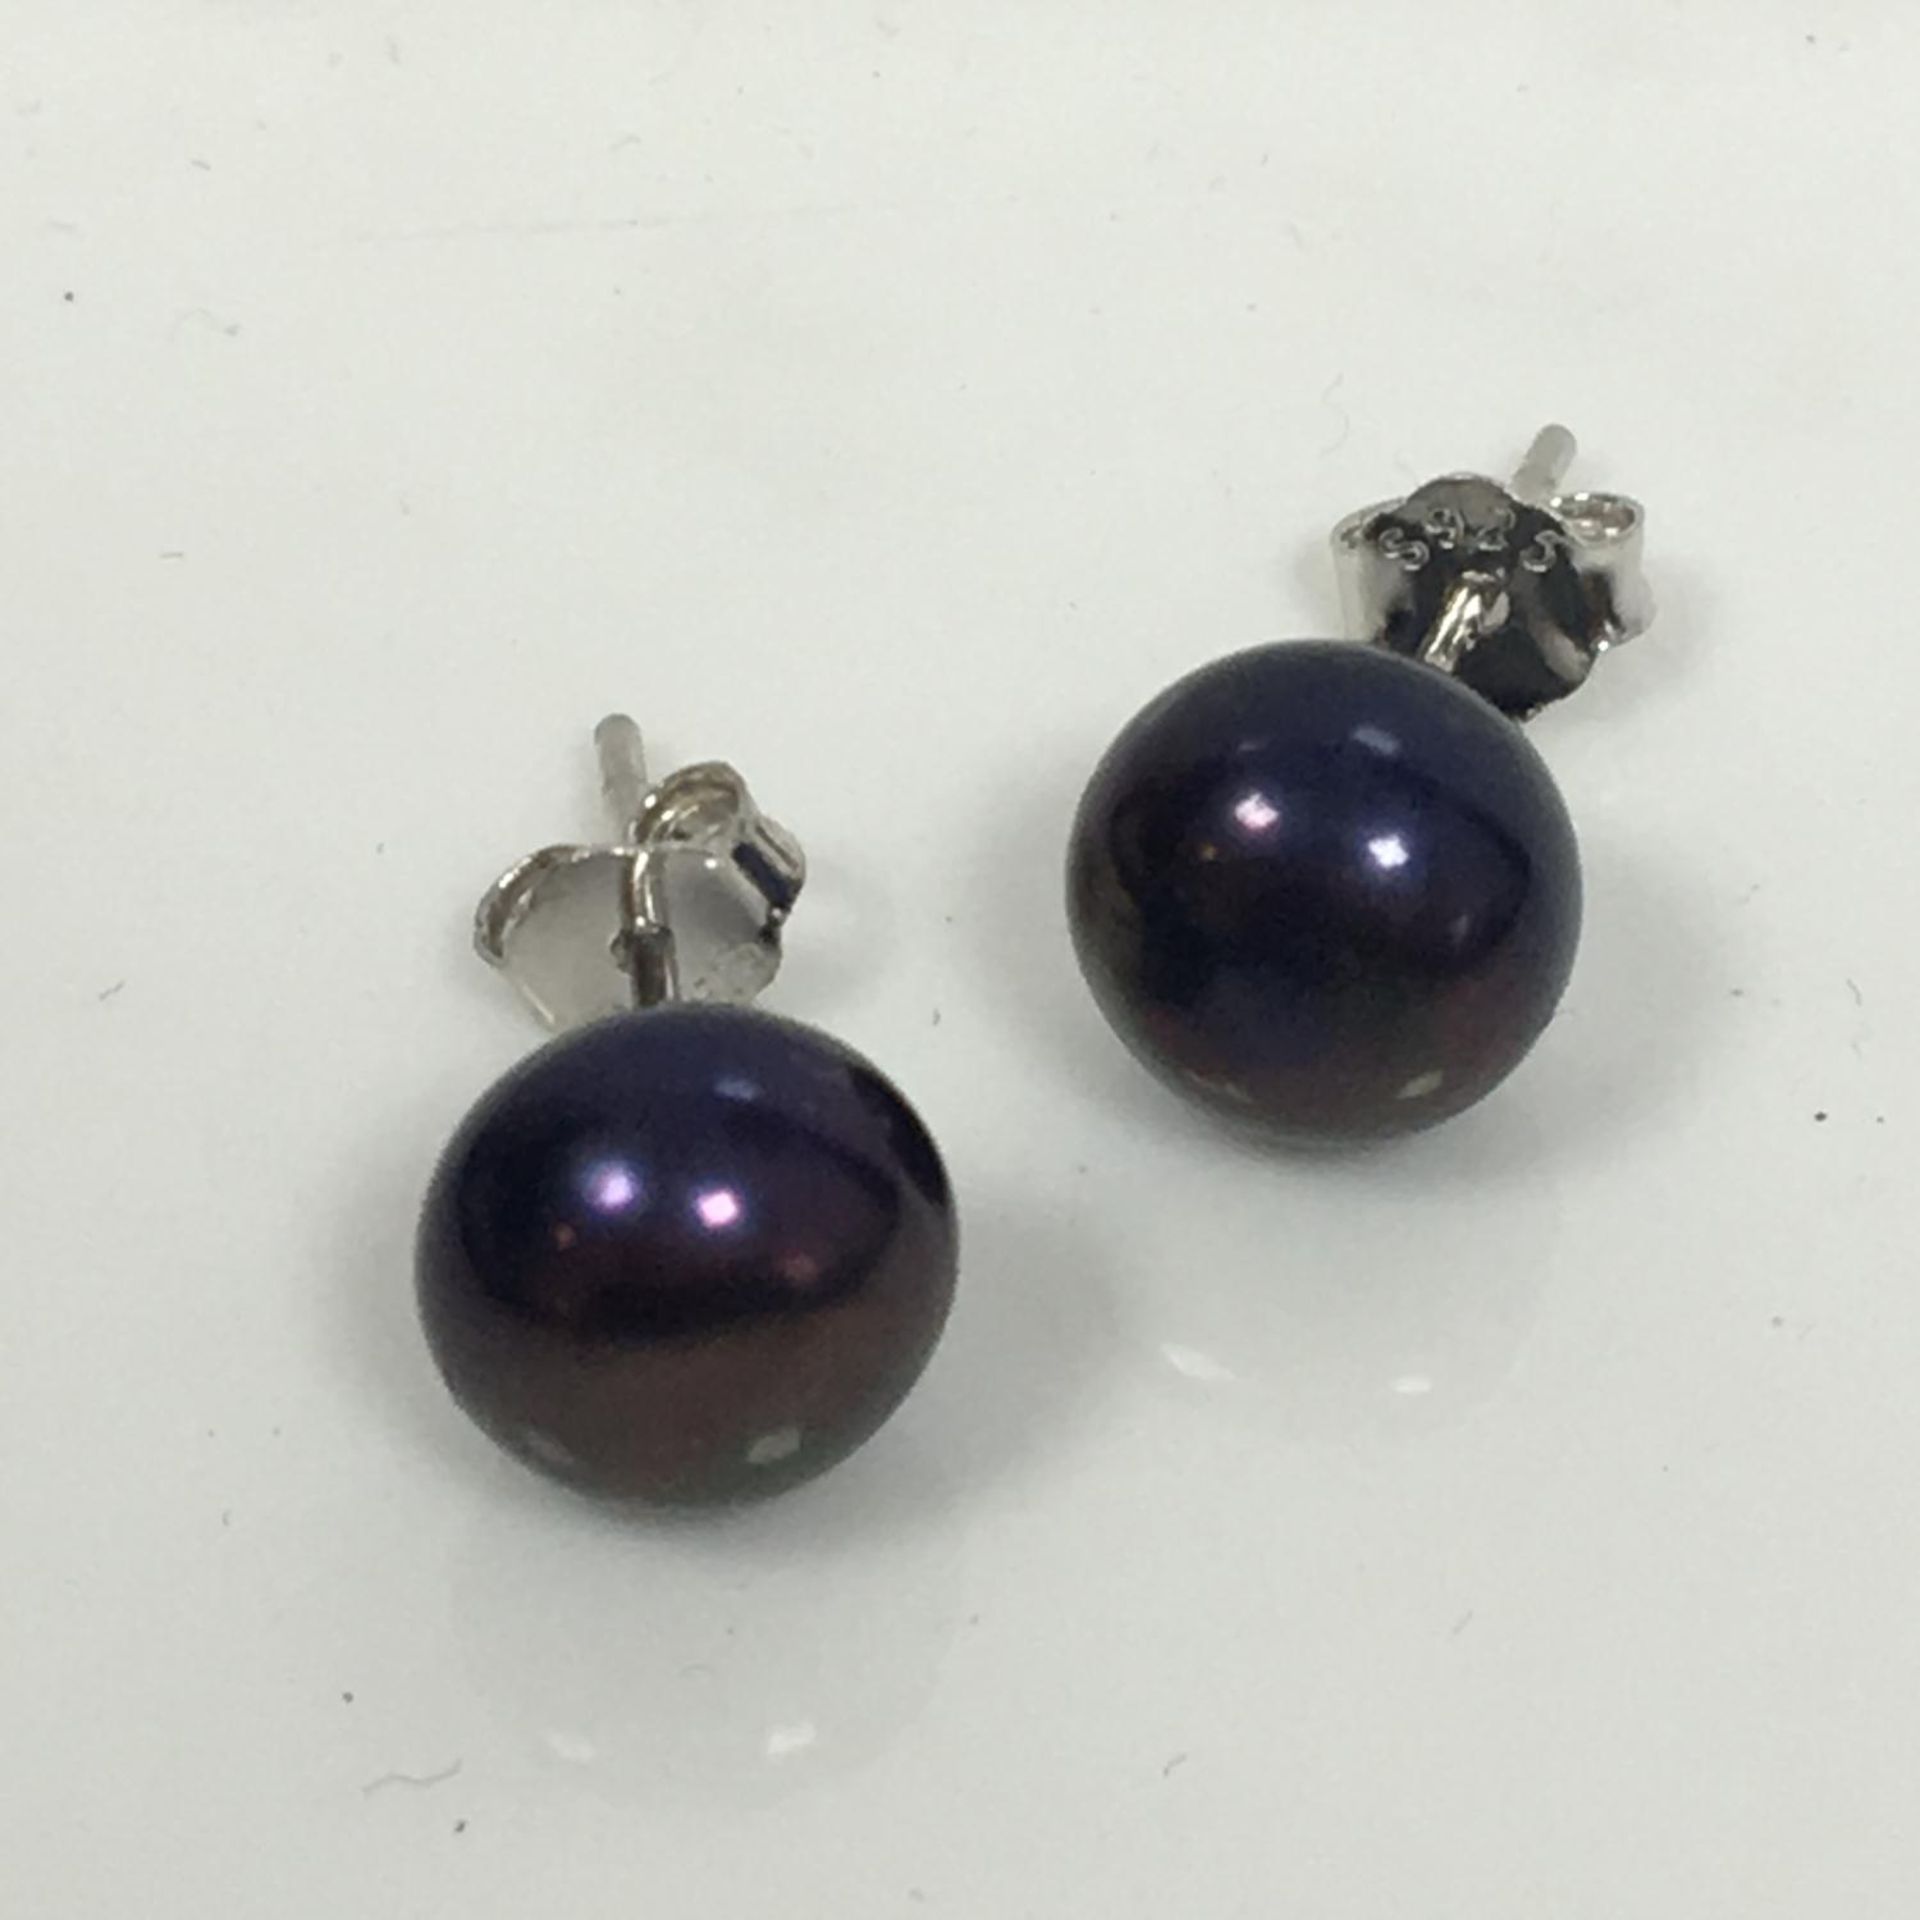 7mm freshwater black pearl stud earrings on 925 silver. Includes free UK delivery.